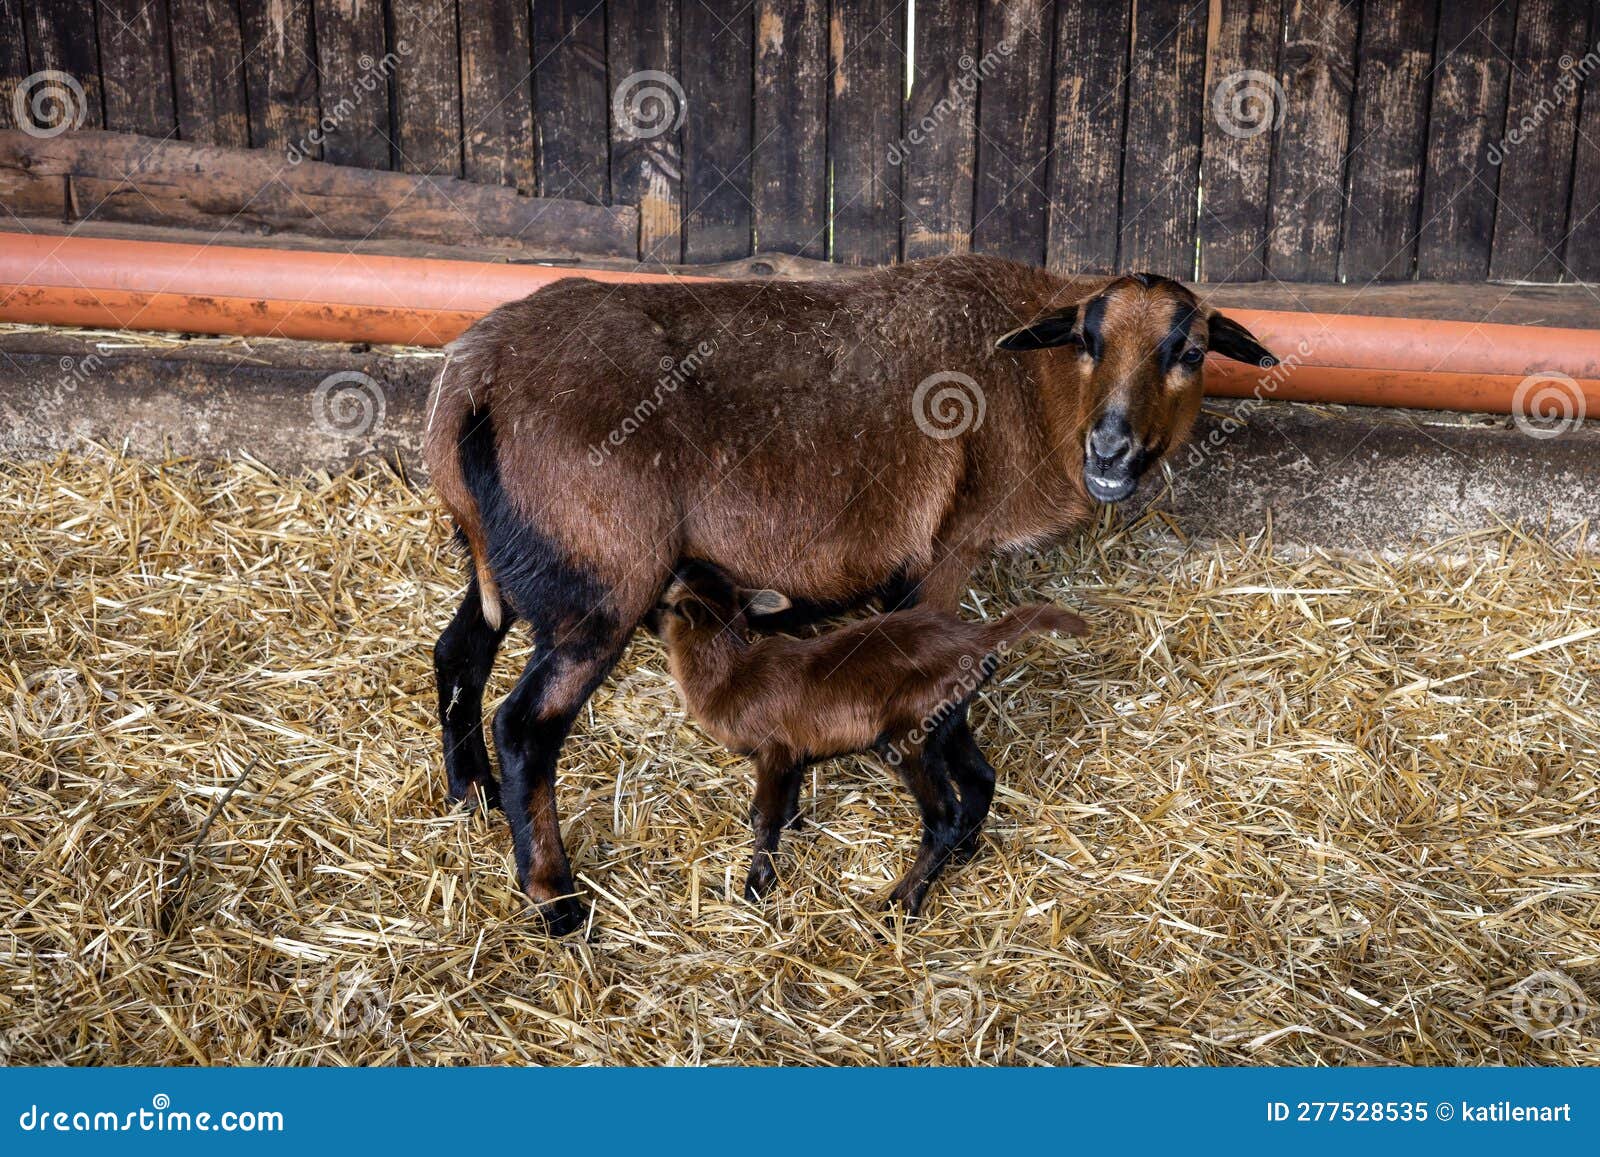 Brown Baby Goat with Its Mother on Hay in the Barn. Stock Image - Image ...